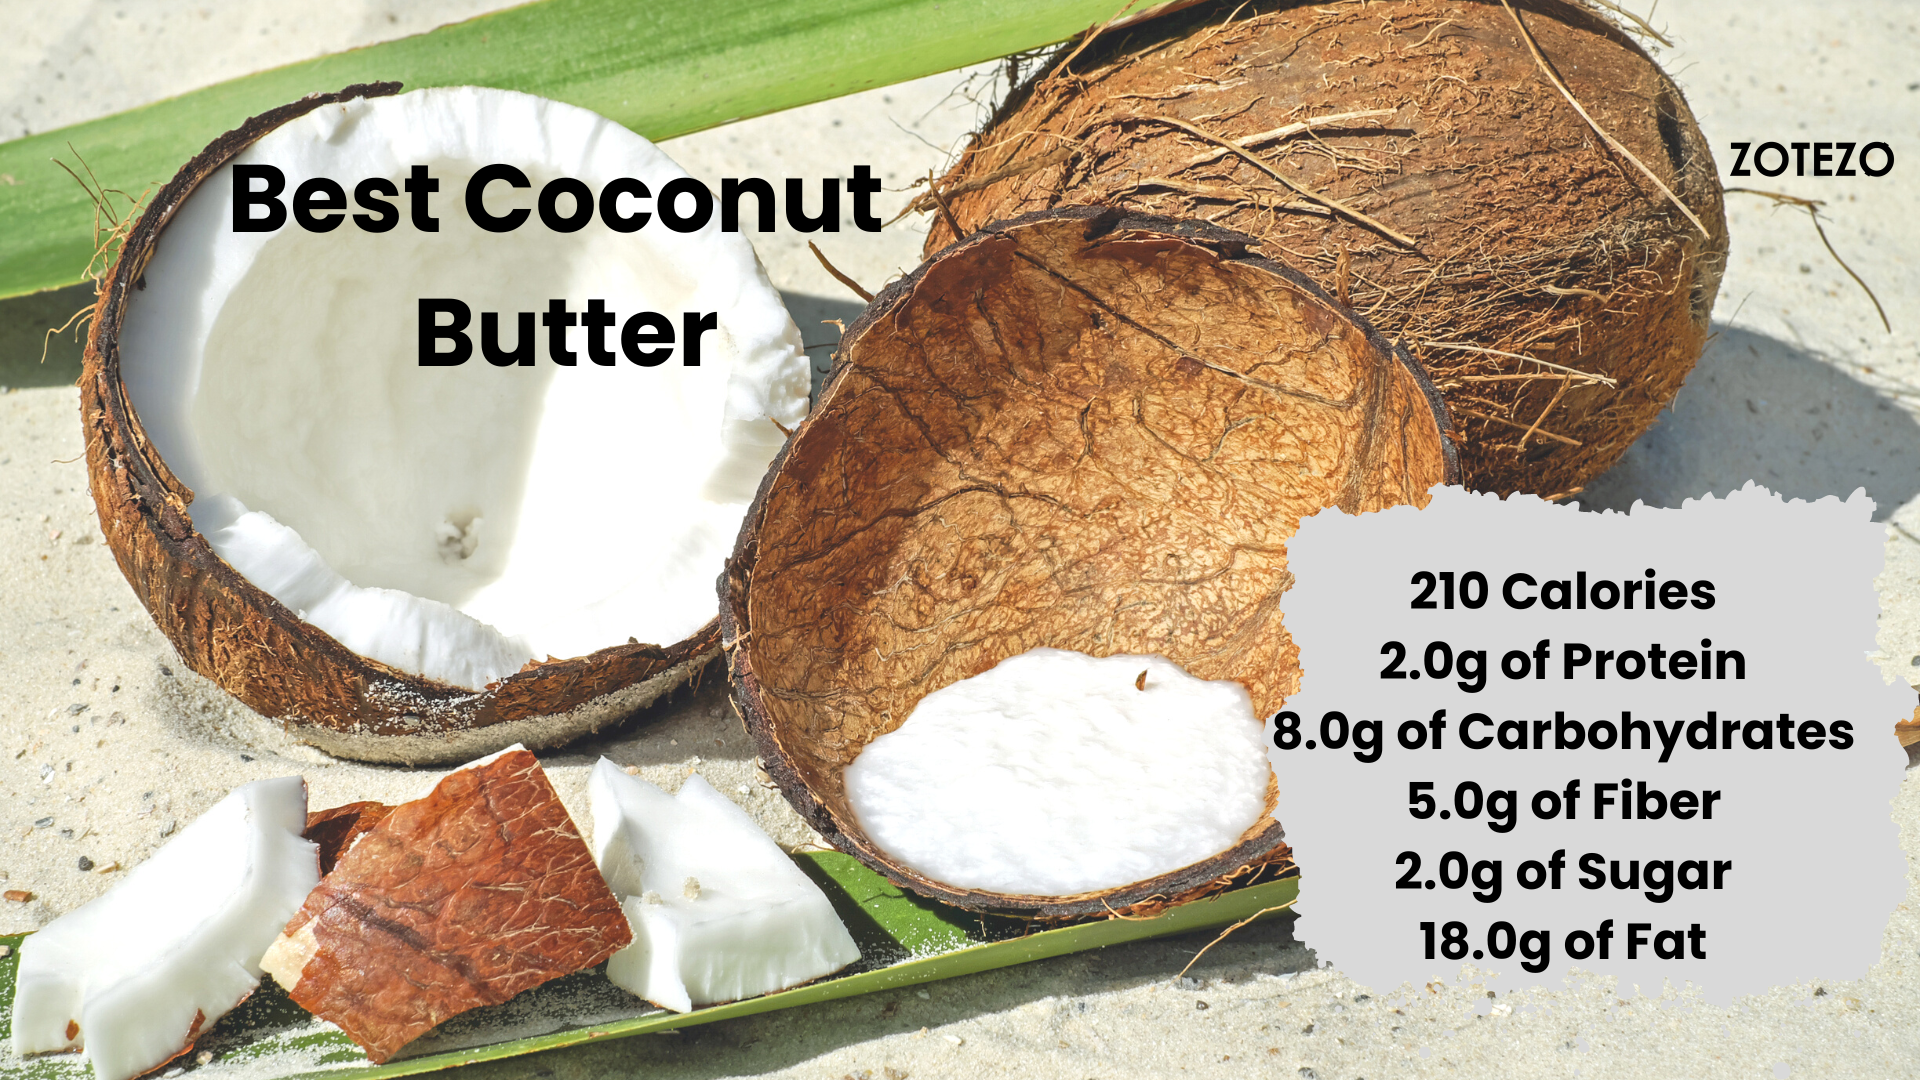 Coconut Butter in India